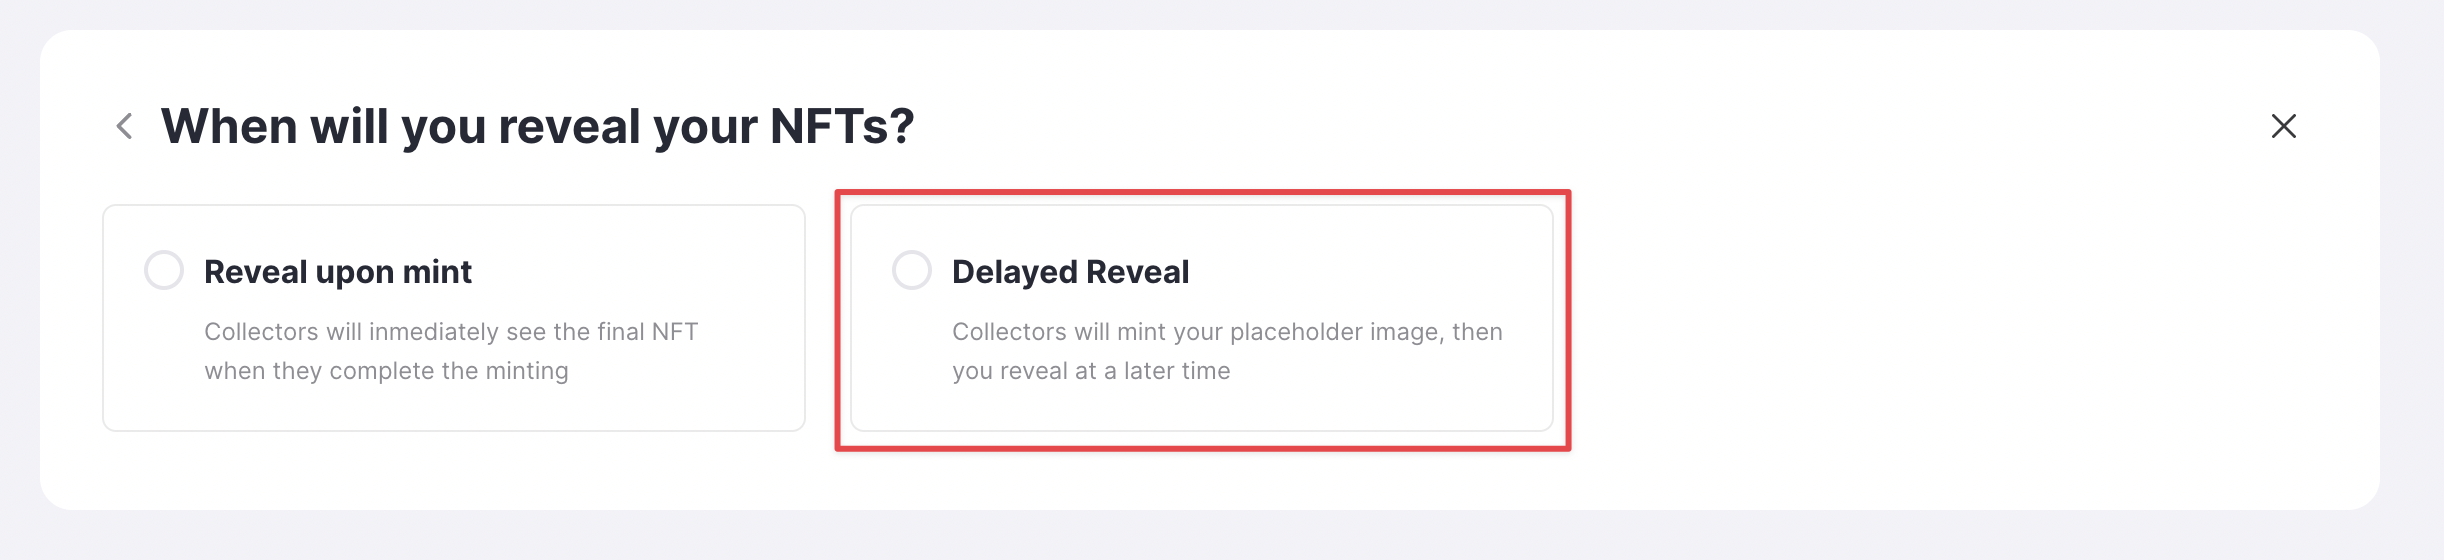 Select Delayed Reveal